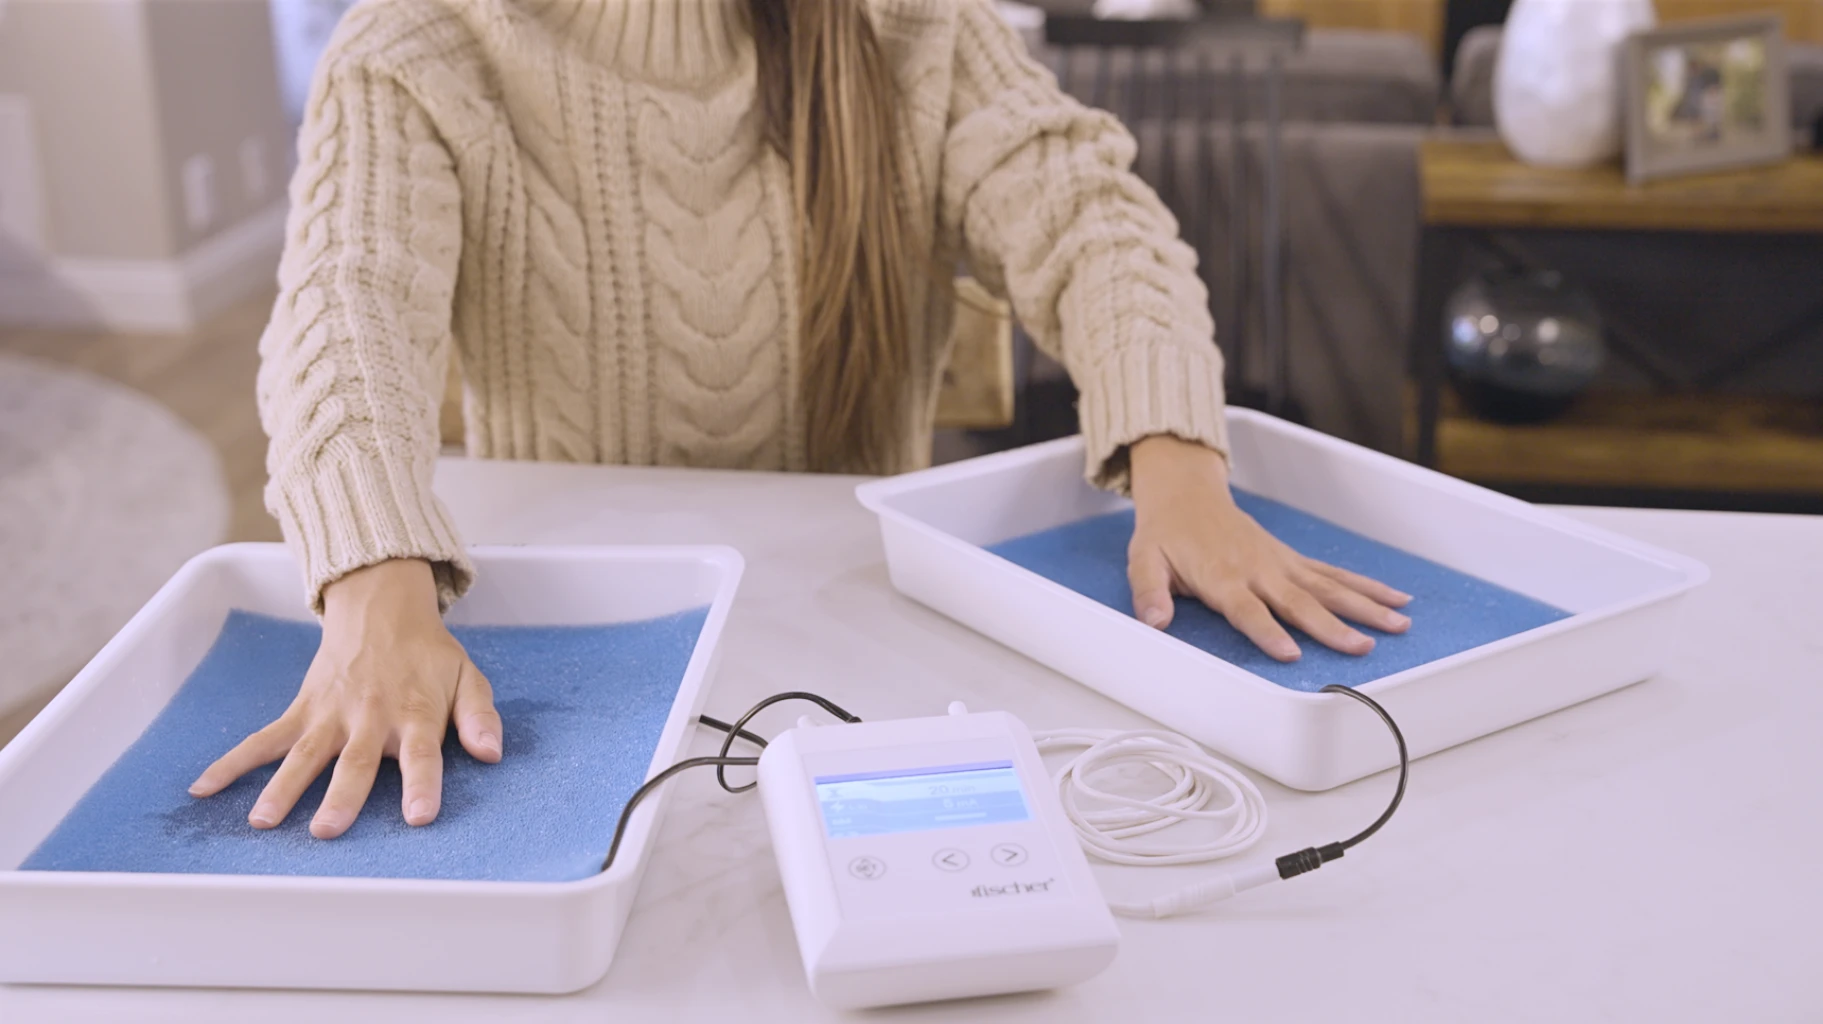 In a comfortable home environment, a young woman with brown hair sits with a warm smile while effectively managing her palmar (hands) hyperhidrosis (excessive sweat) using RA Fischer Co.'s original metal-free iontophoresis device, "The Fischer." Her hands are comfortably placed within the white water bath trays containing blue pH-balancing foam, along with silicone-graphite electrodes, providing a comprehensive and innovative solution for her condition.